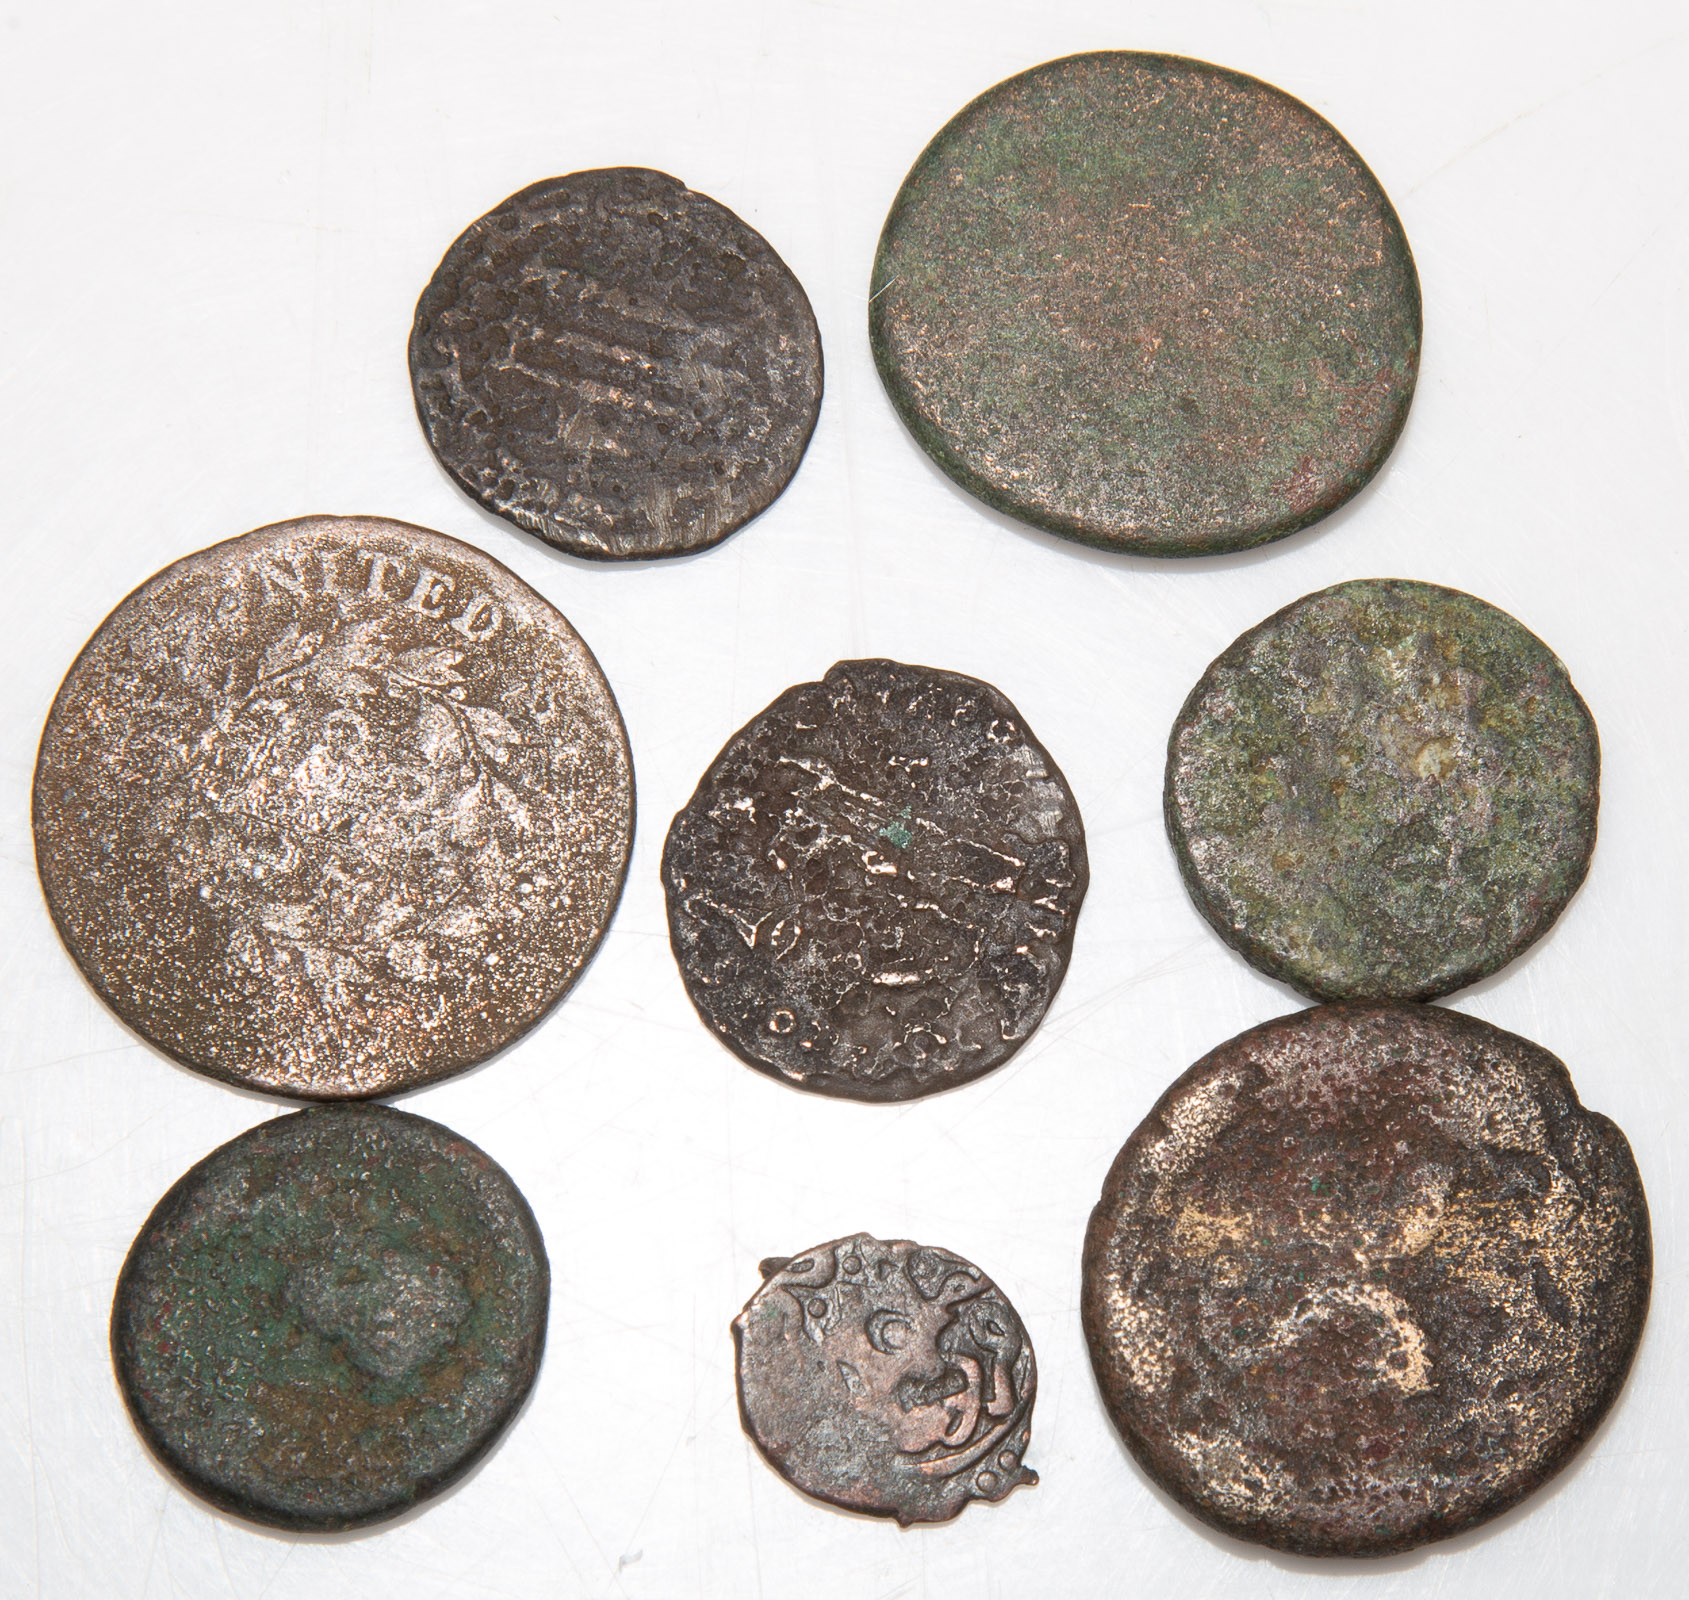 SMALL GROUP OF ROMAN BRONZE COINS